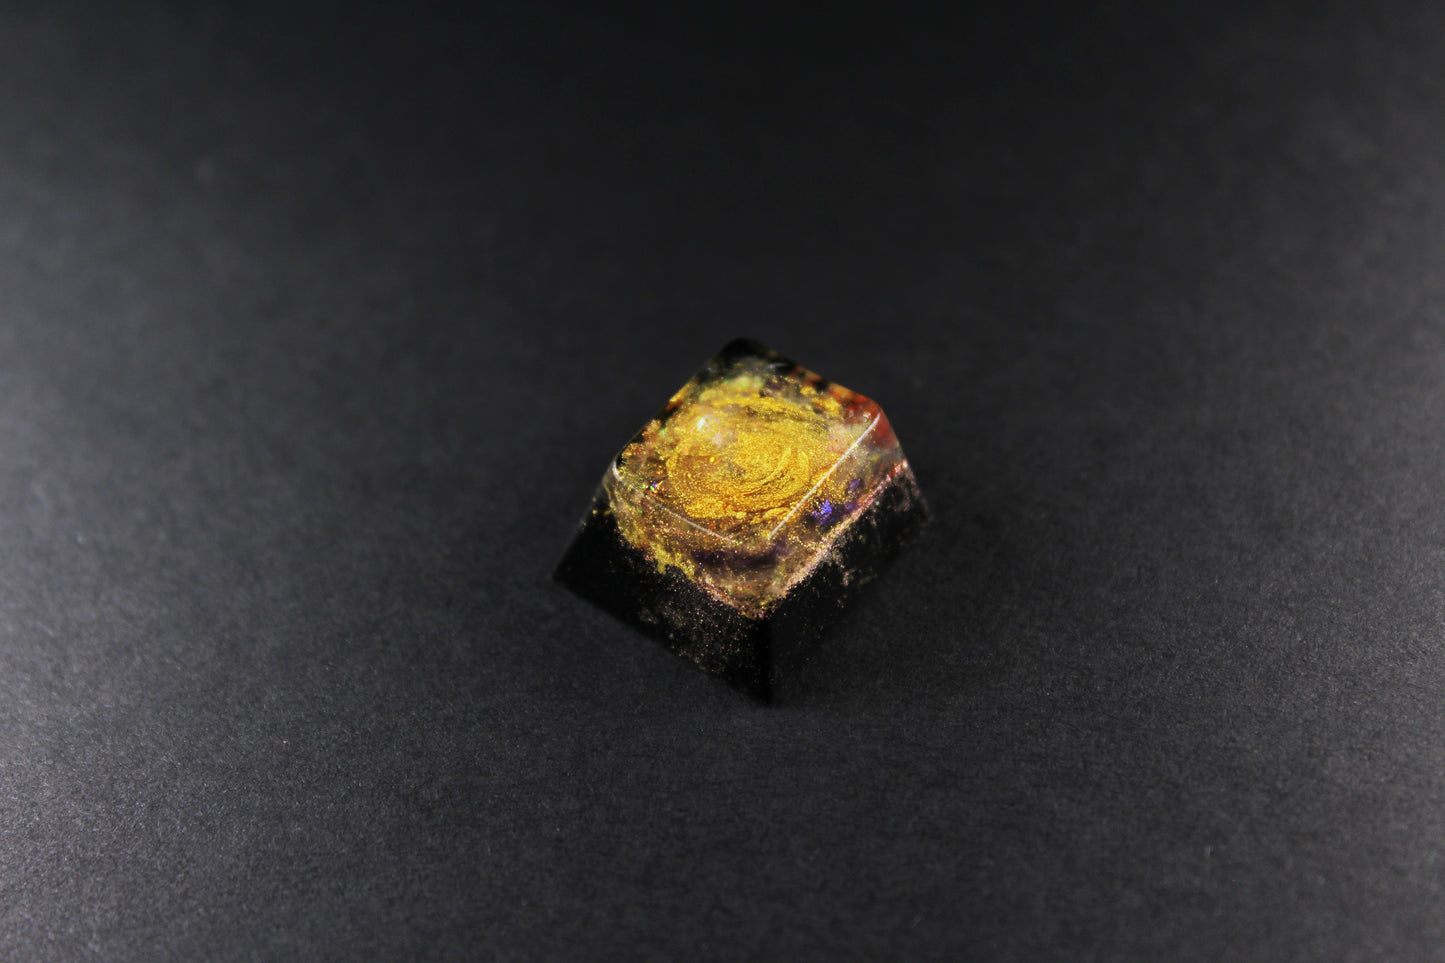 Cherry Esc- Deep Purple- 1 - PrimeCaps Keycap - Blank and Sculpted Artisan Keycaps for cherry MX mechanical keyboards 